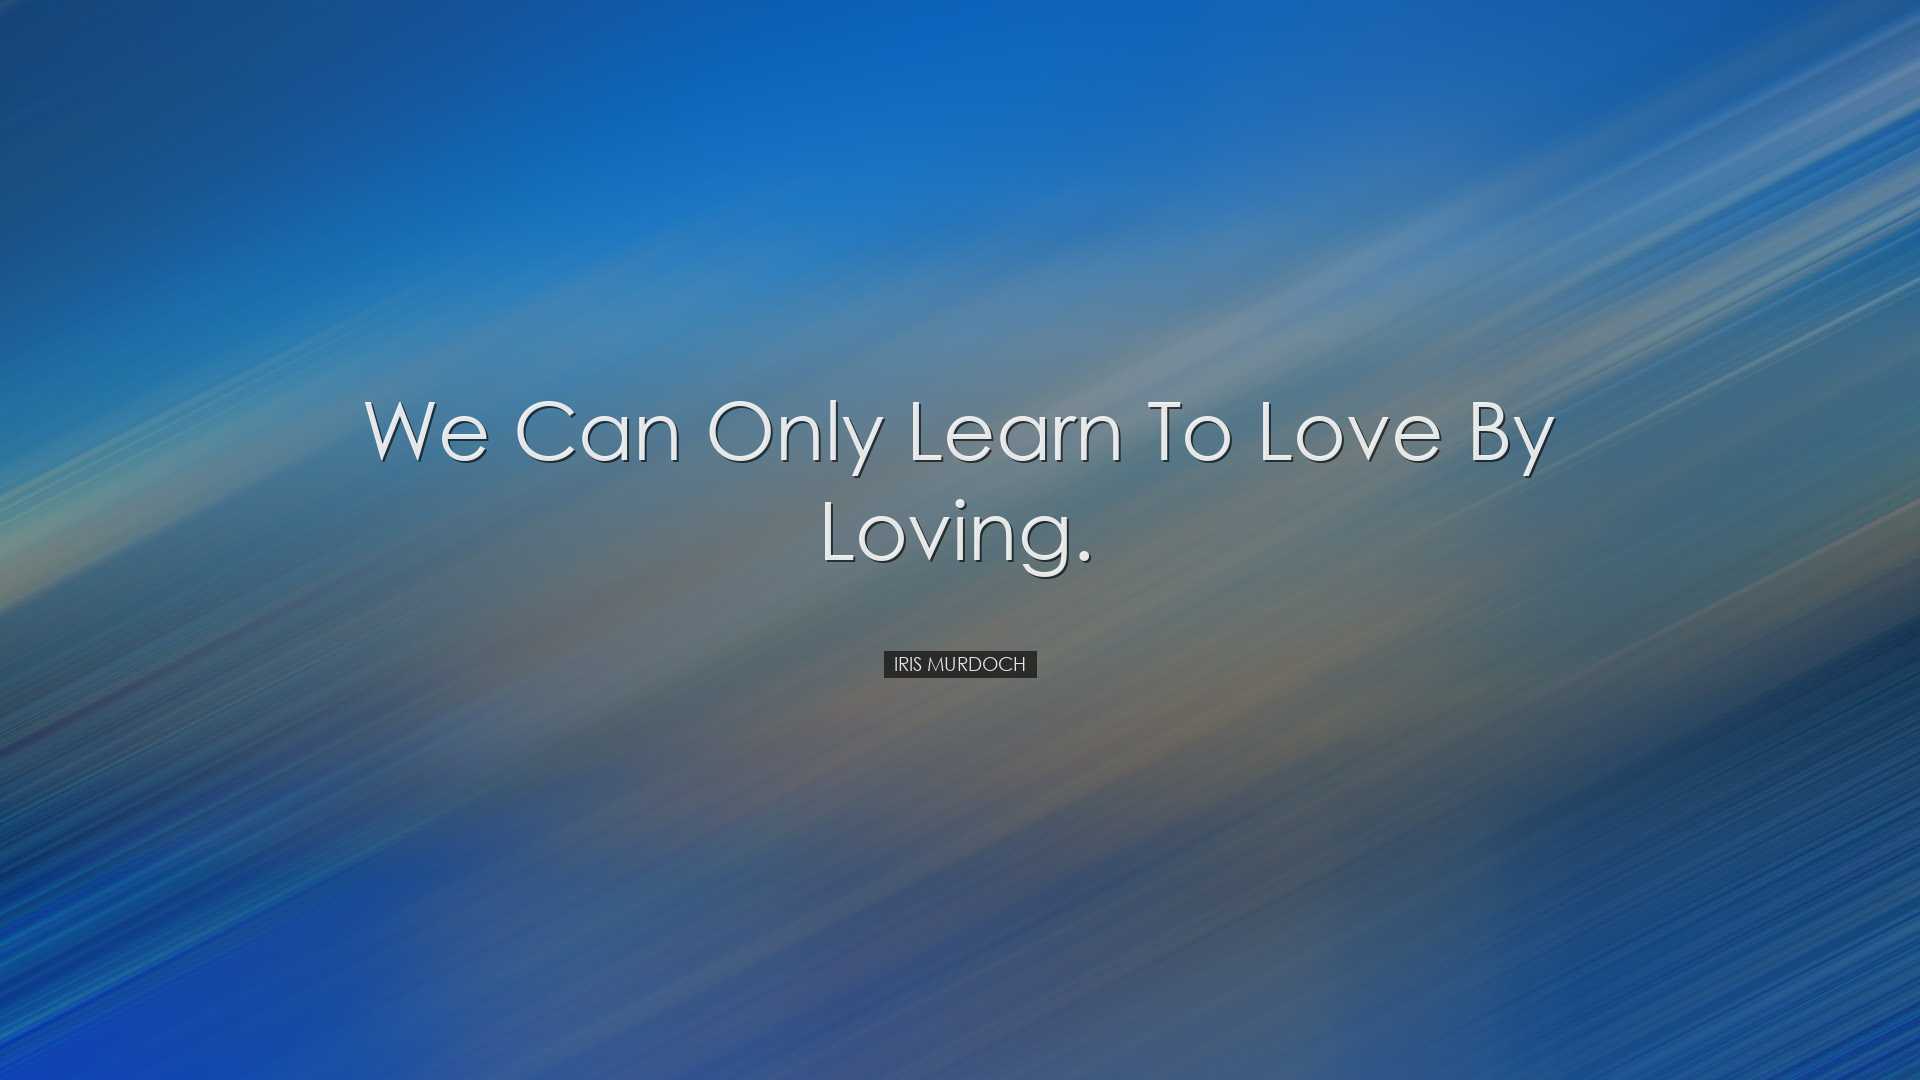 We can only learn to love by loving. - Iris Murdoch